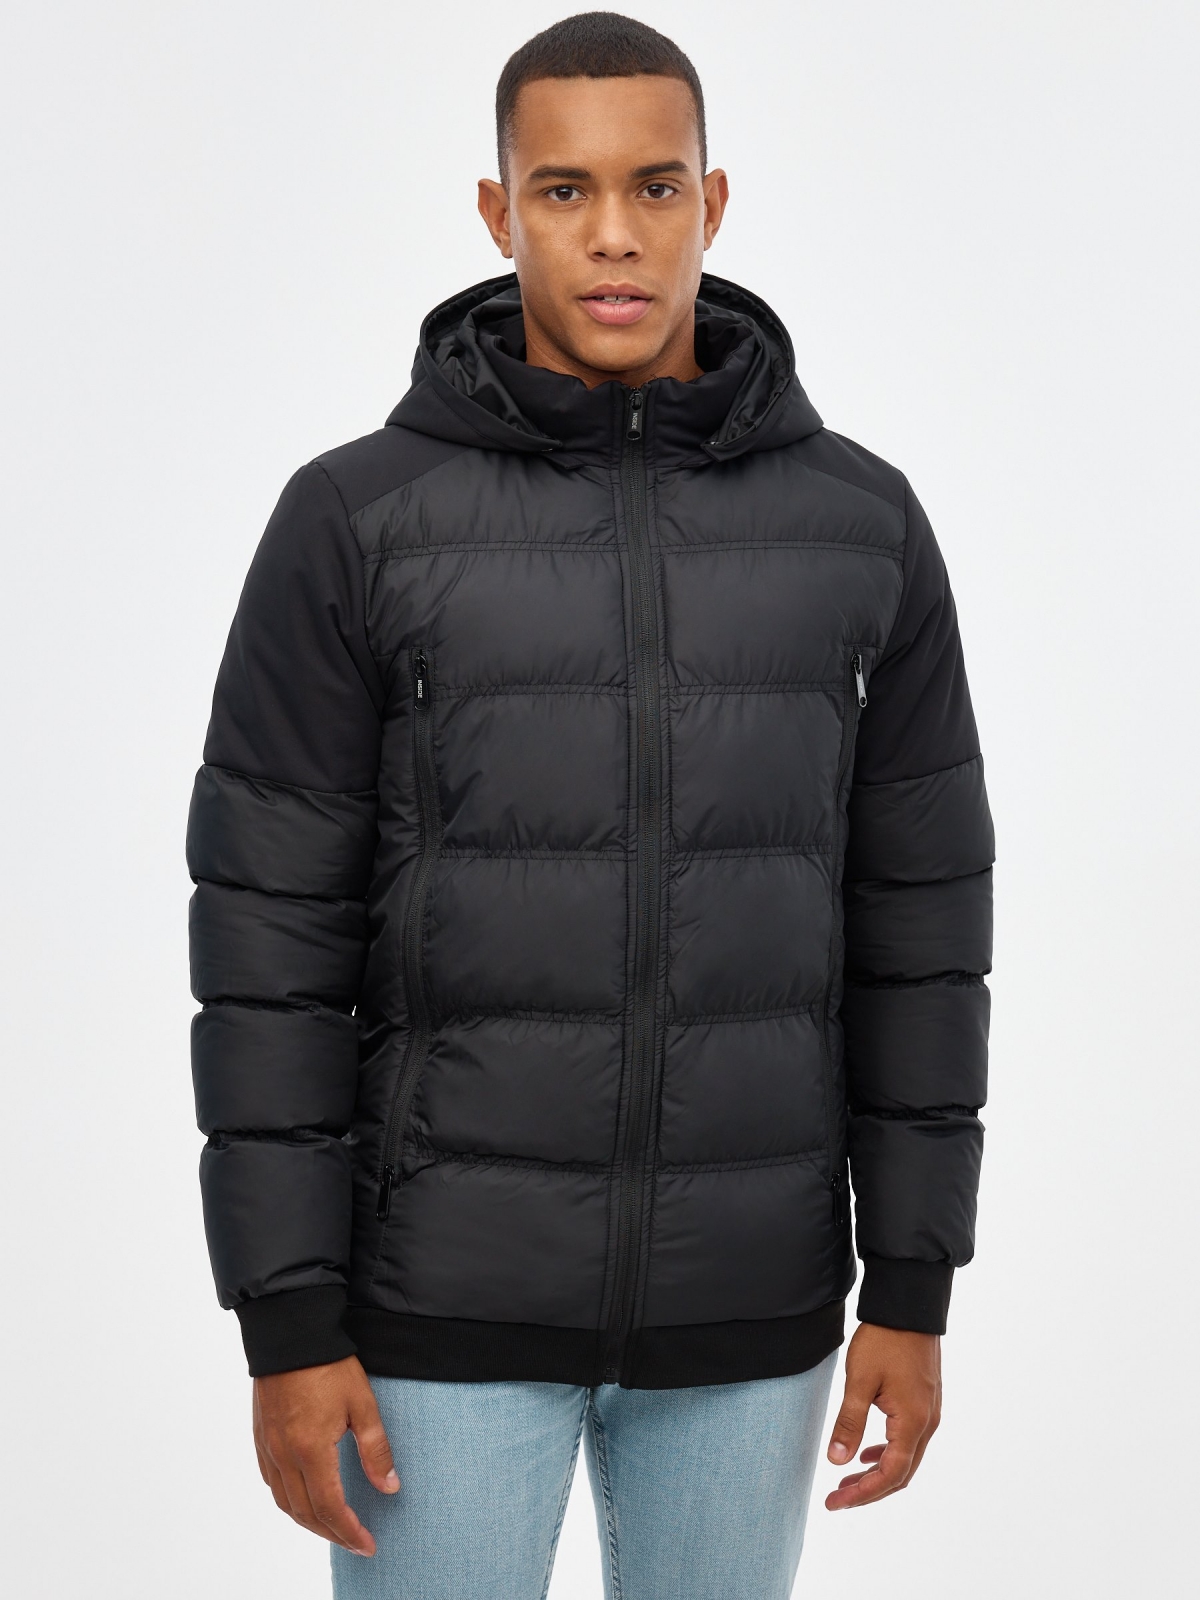 Nylon coat with long zippers black middle front view